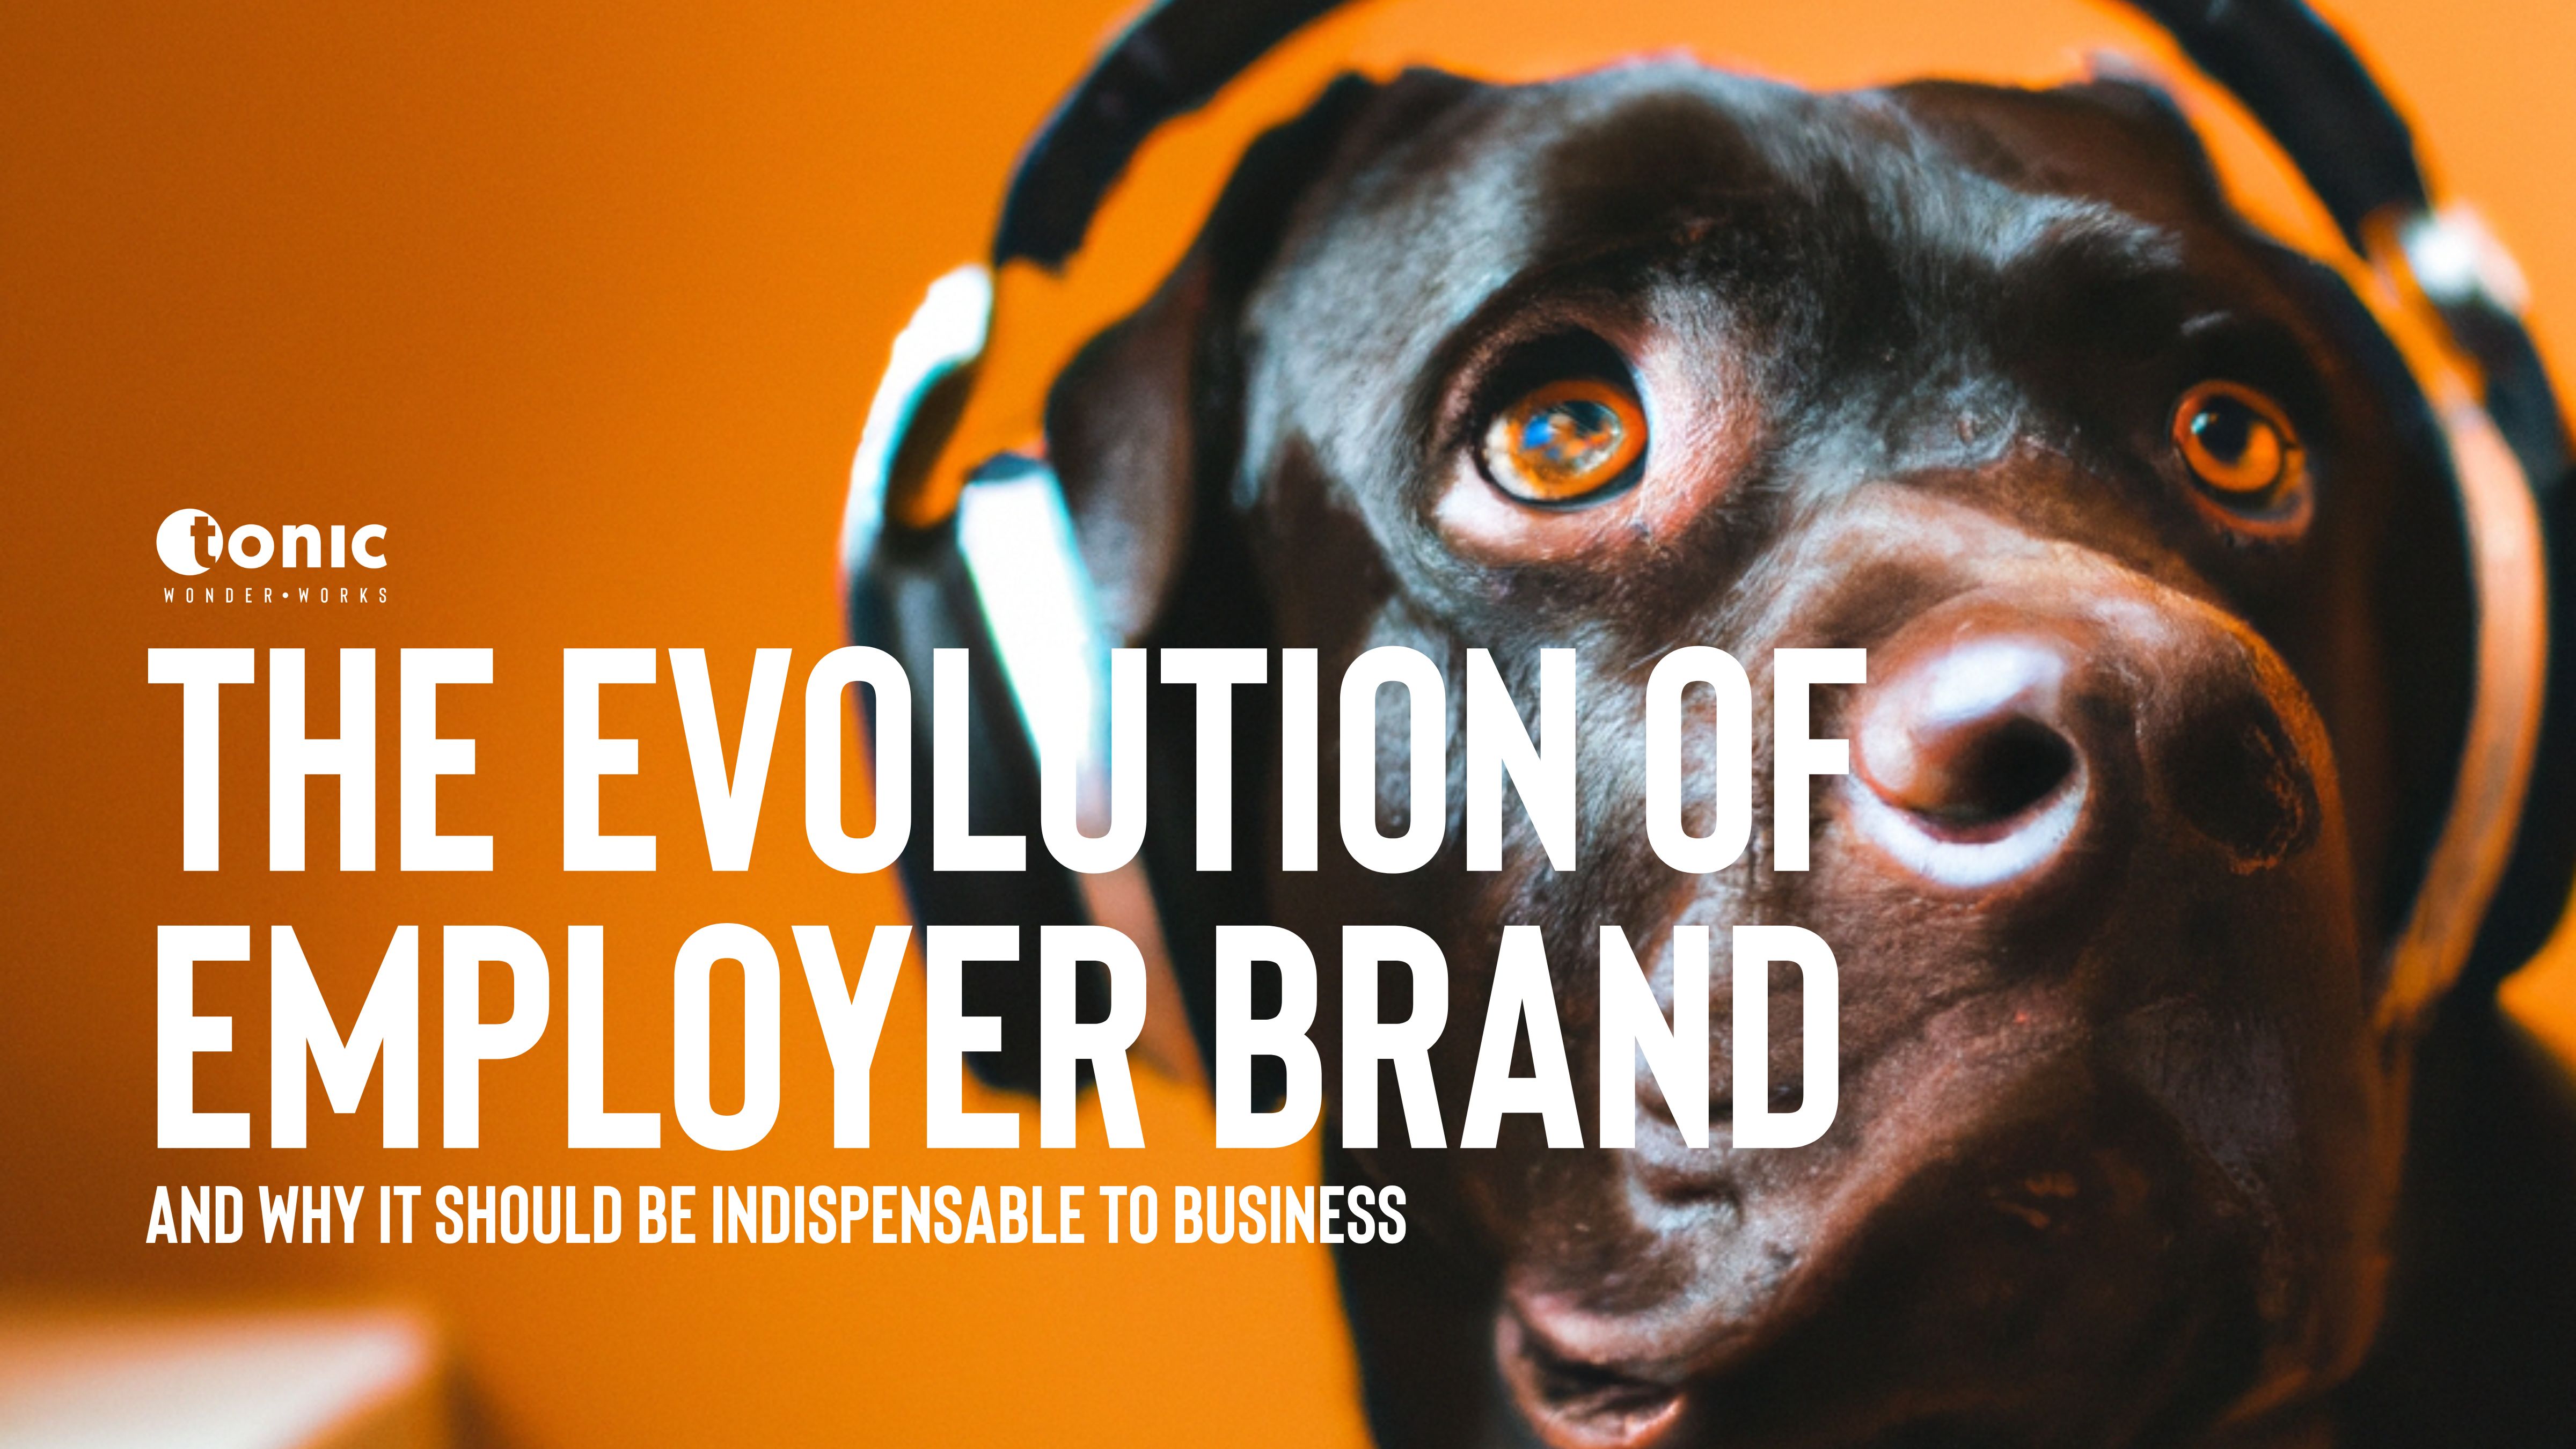 The evolution of employer brand: Thoughts when walking the dog